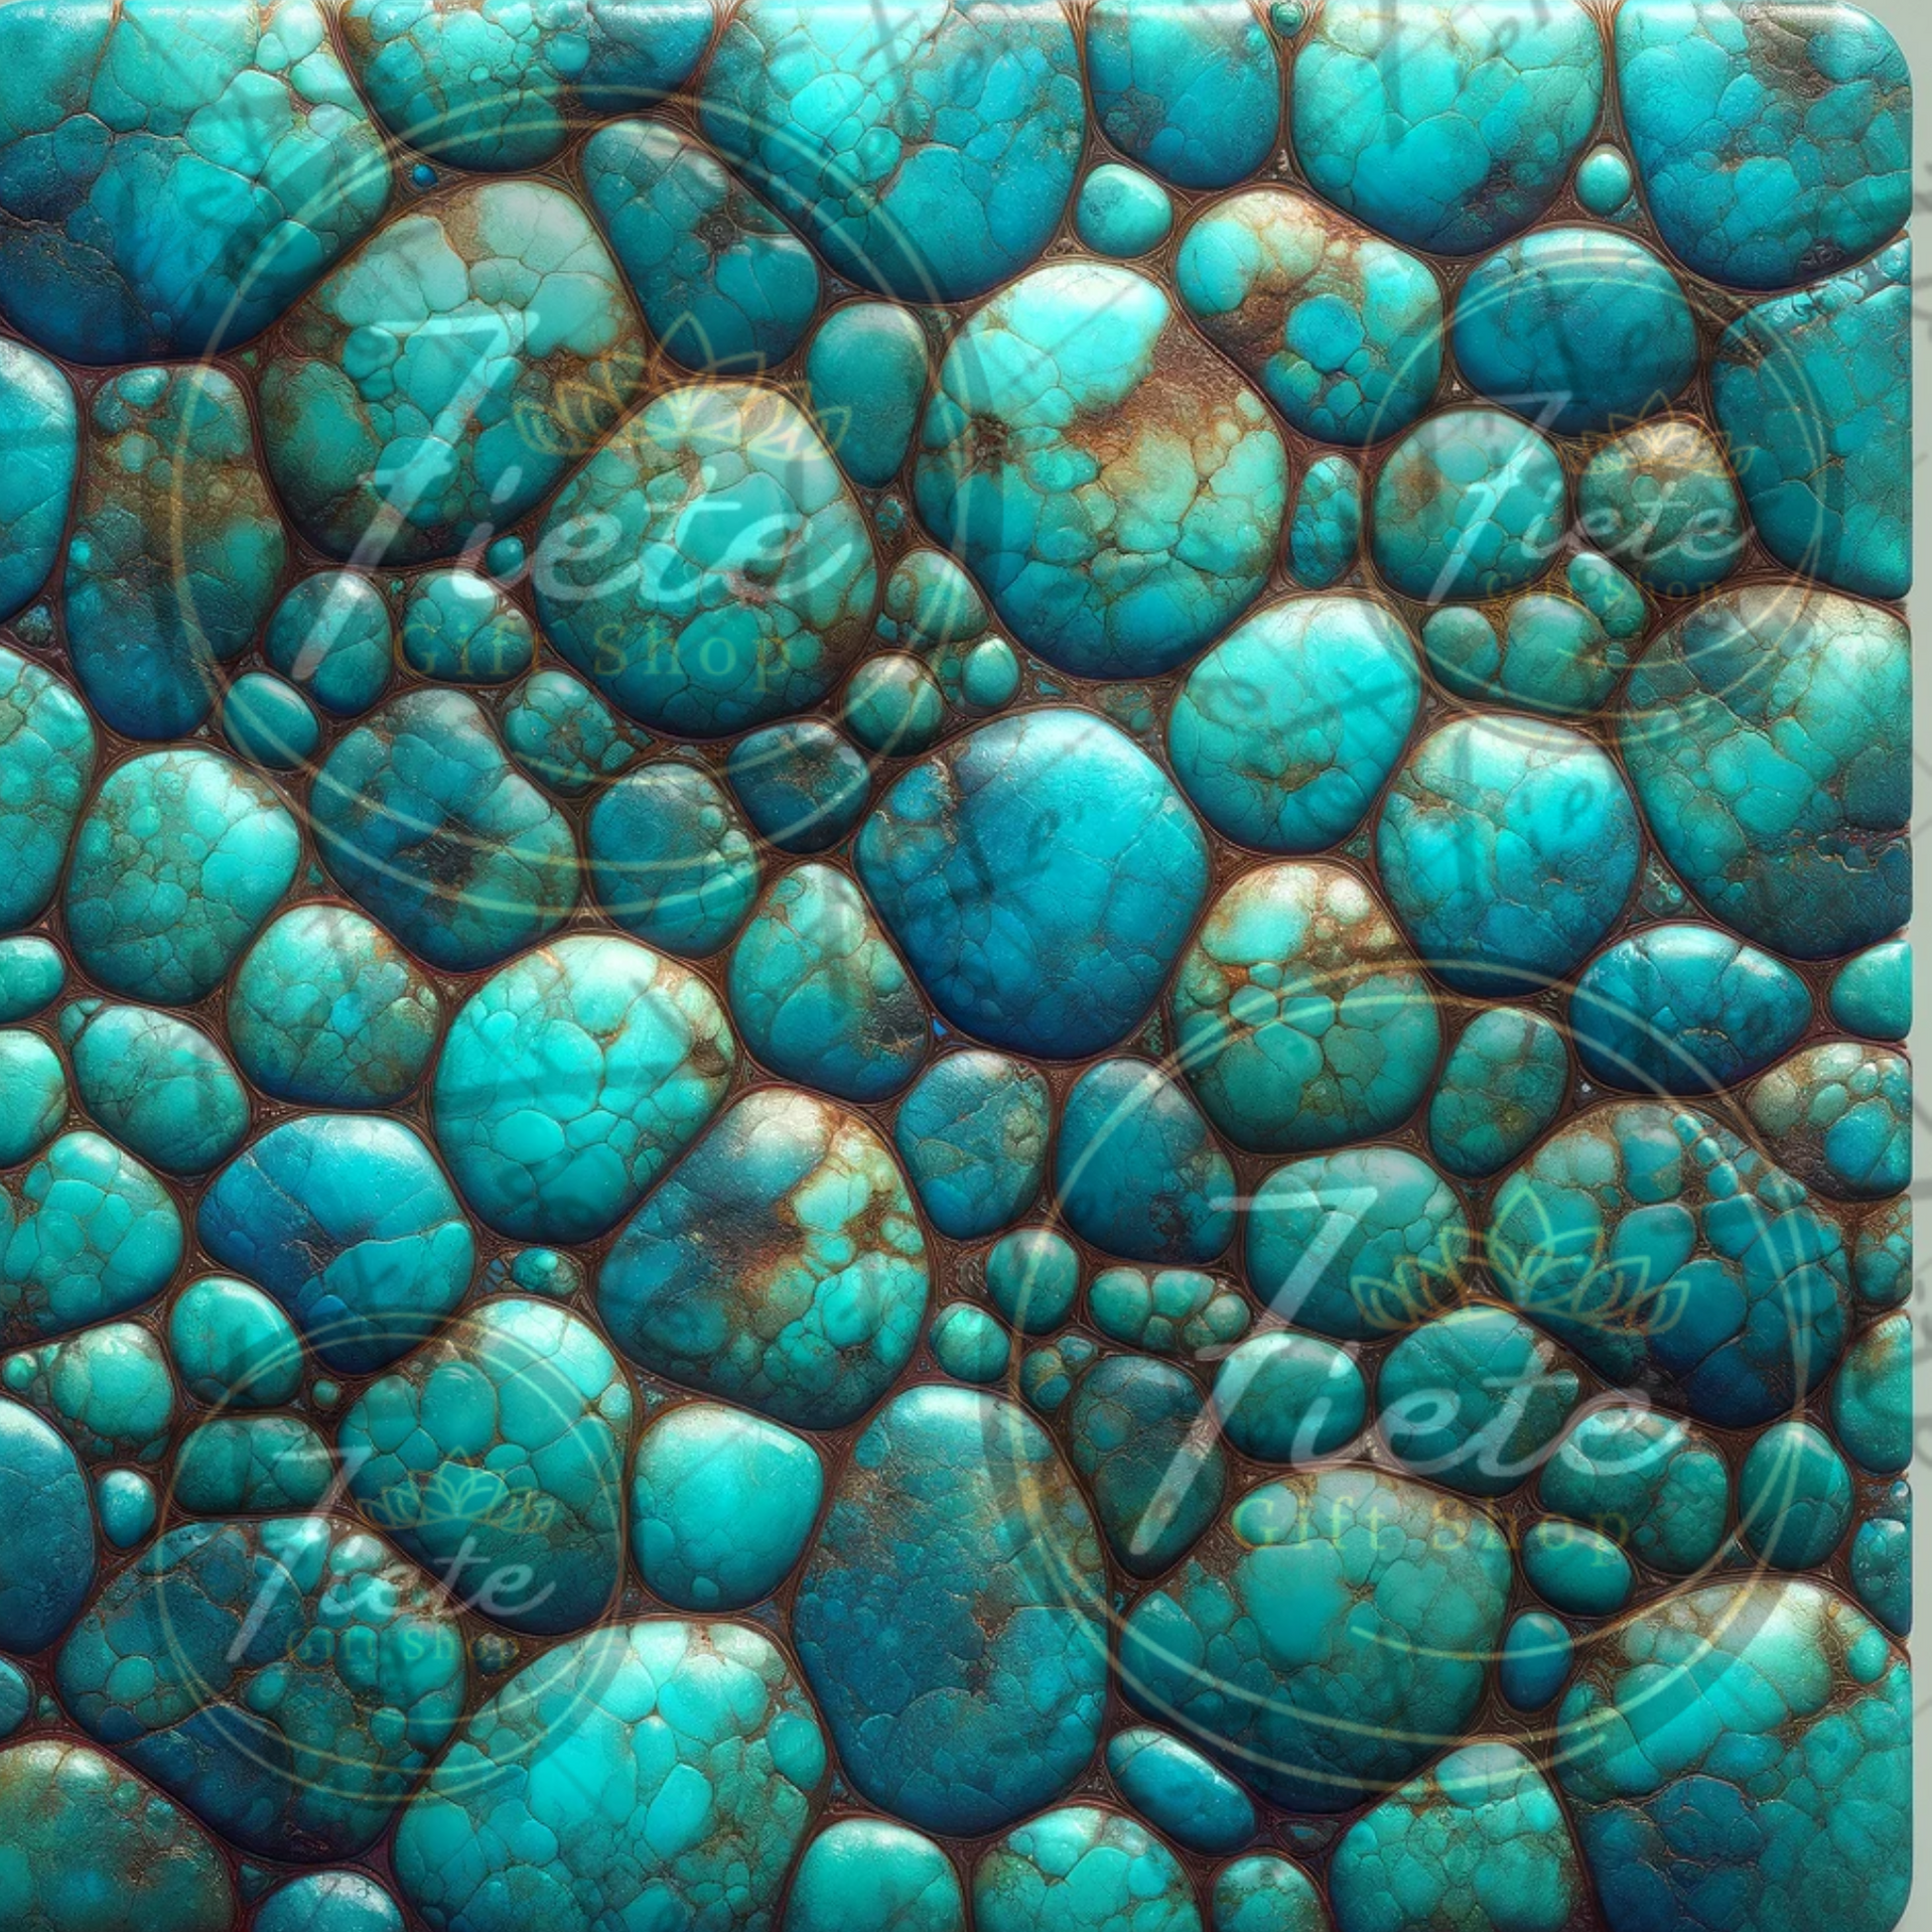 A square filled with an intricate pattern that resembles antique turquoise stones.